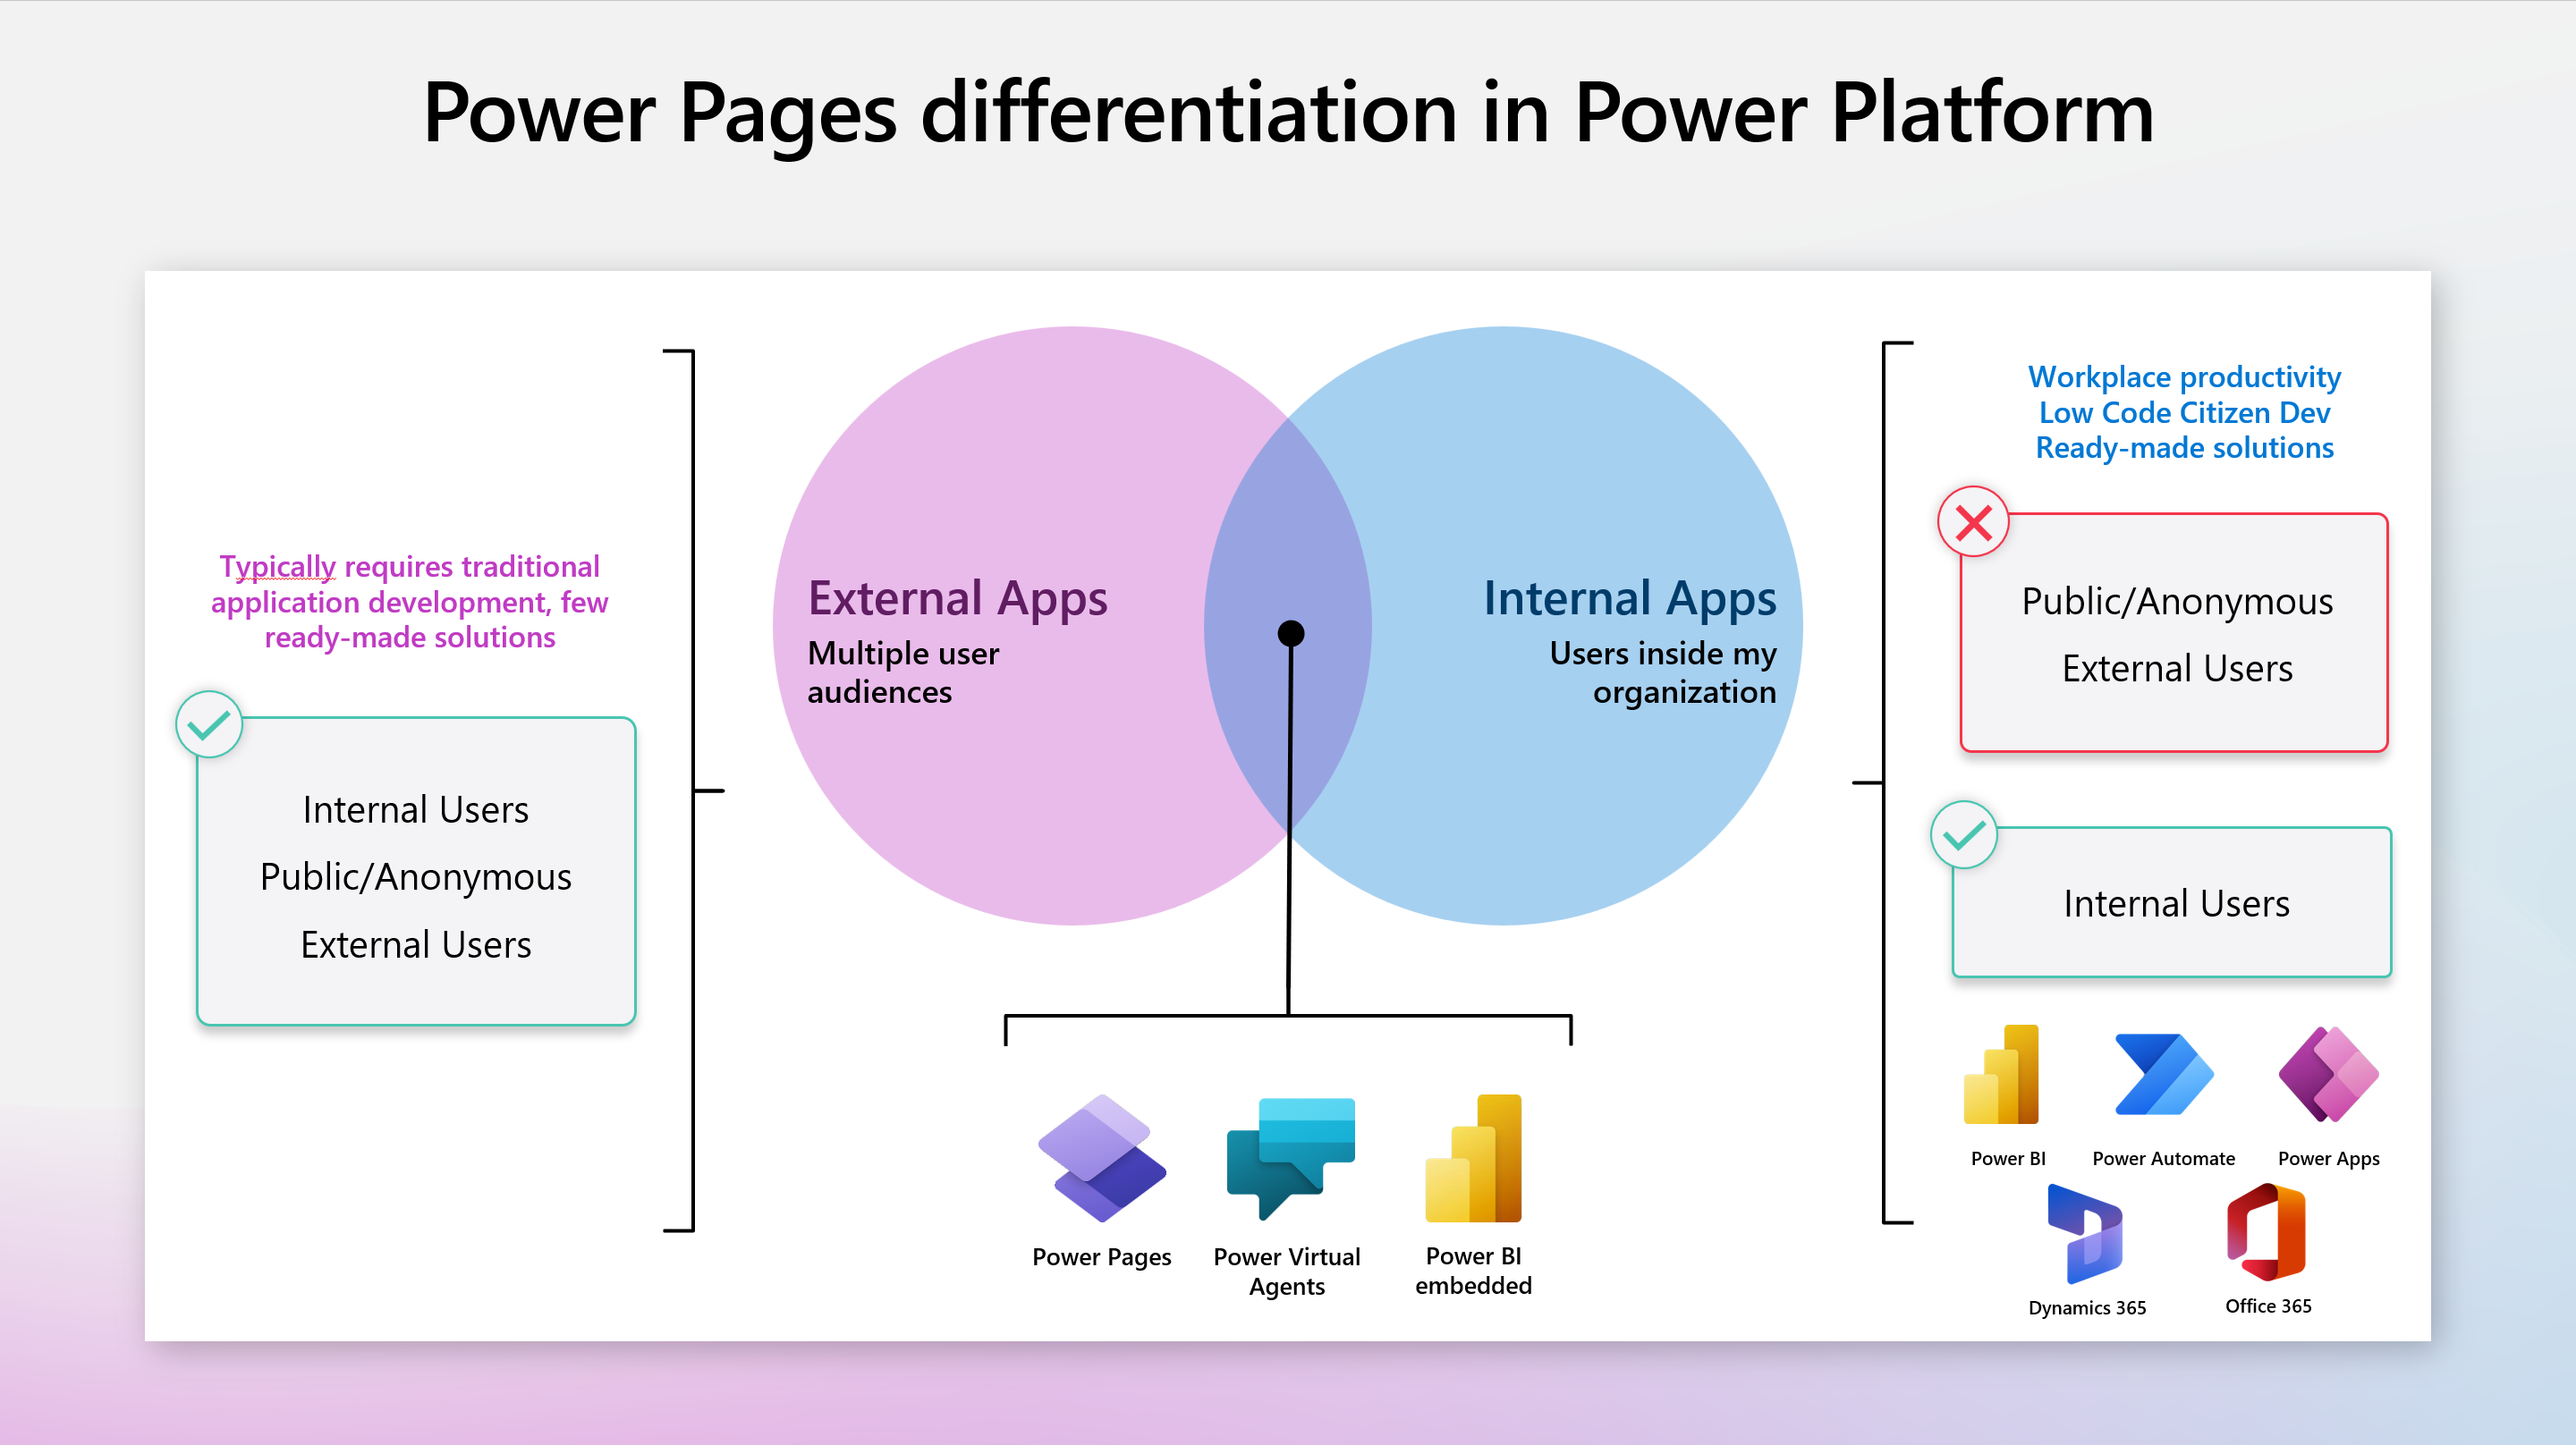 Power Pages differentiation in Power Platform